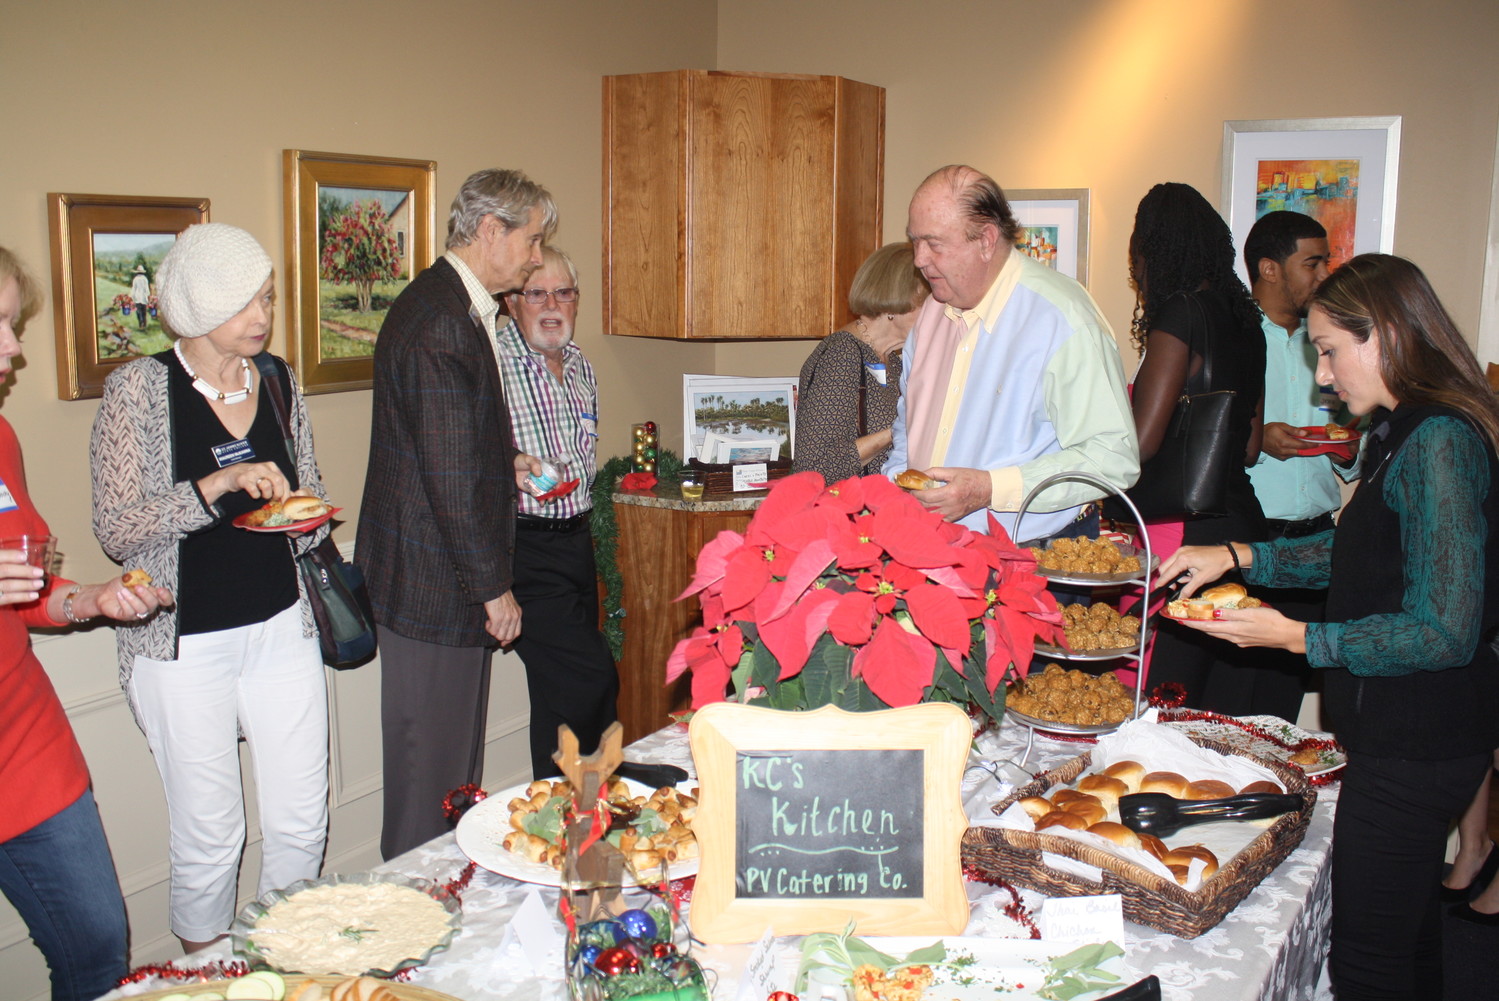 Event guests enjoy food from KC’s Kitchen.